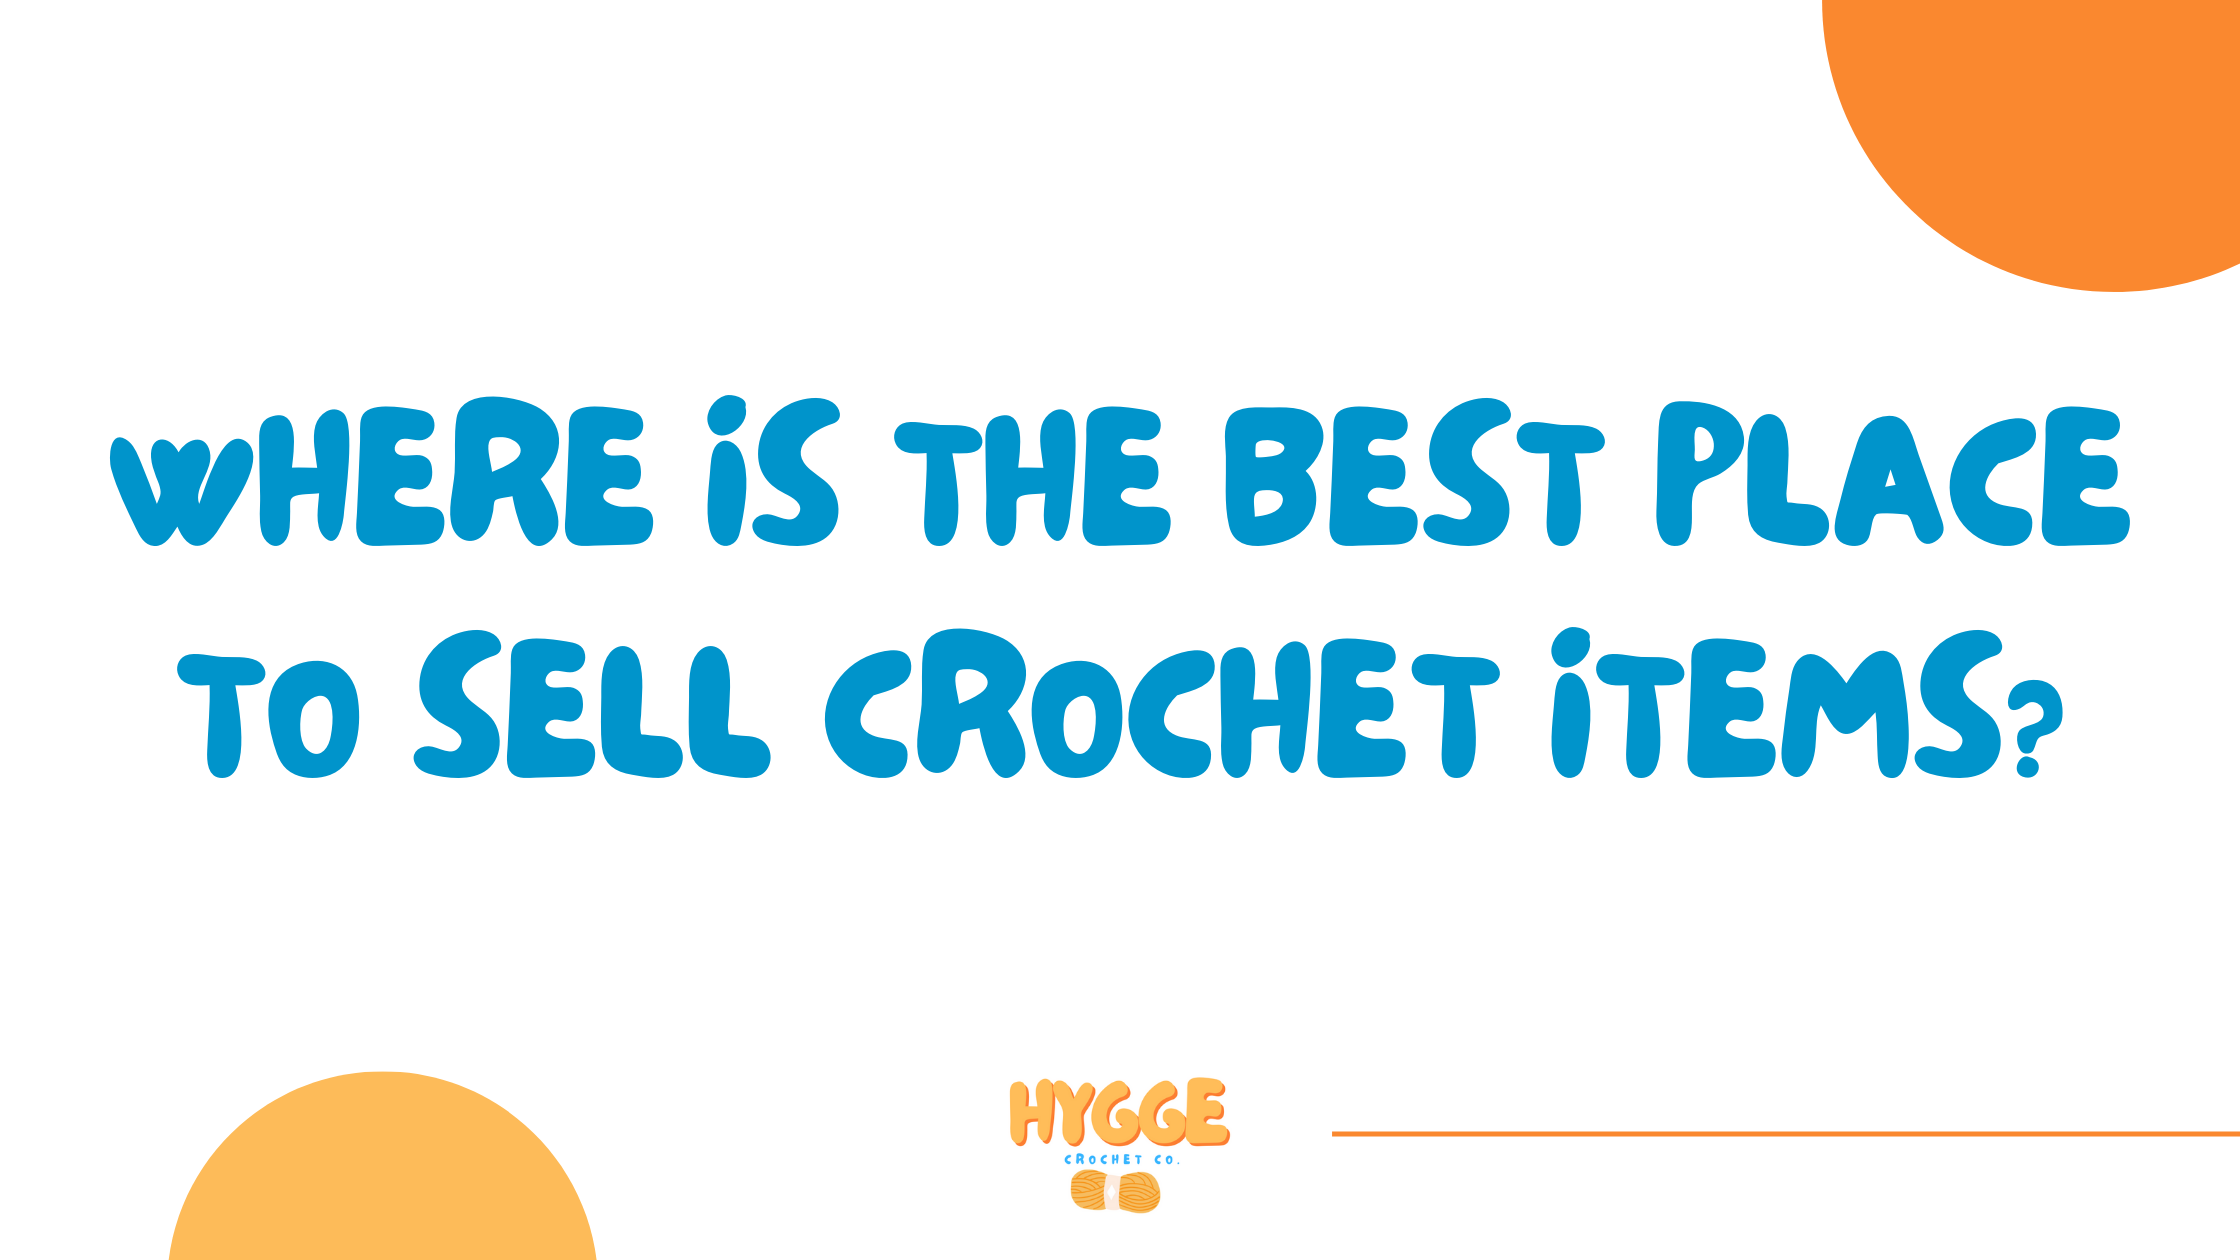 Where Is the Best Place to Sell Crochet Items?